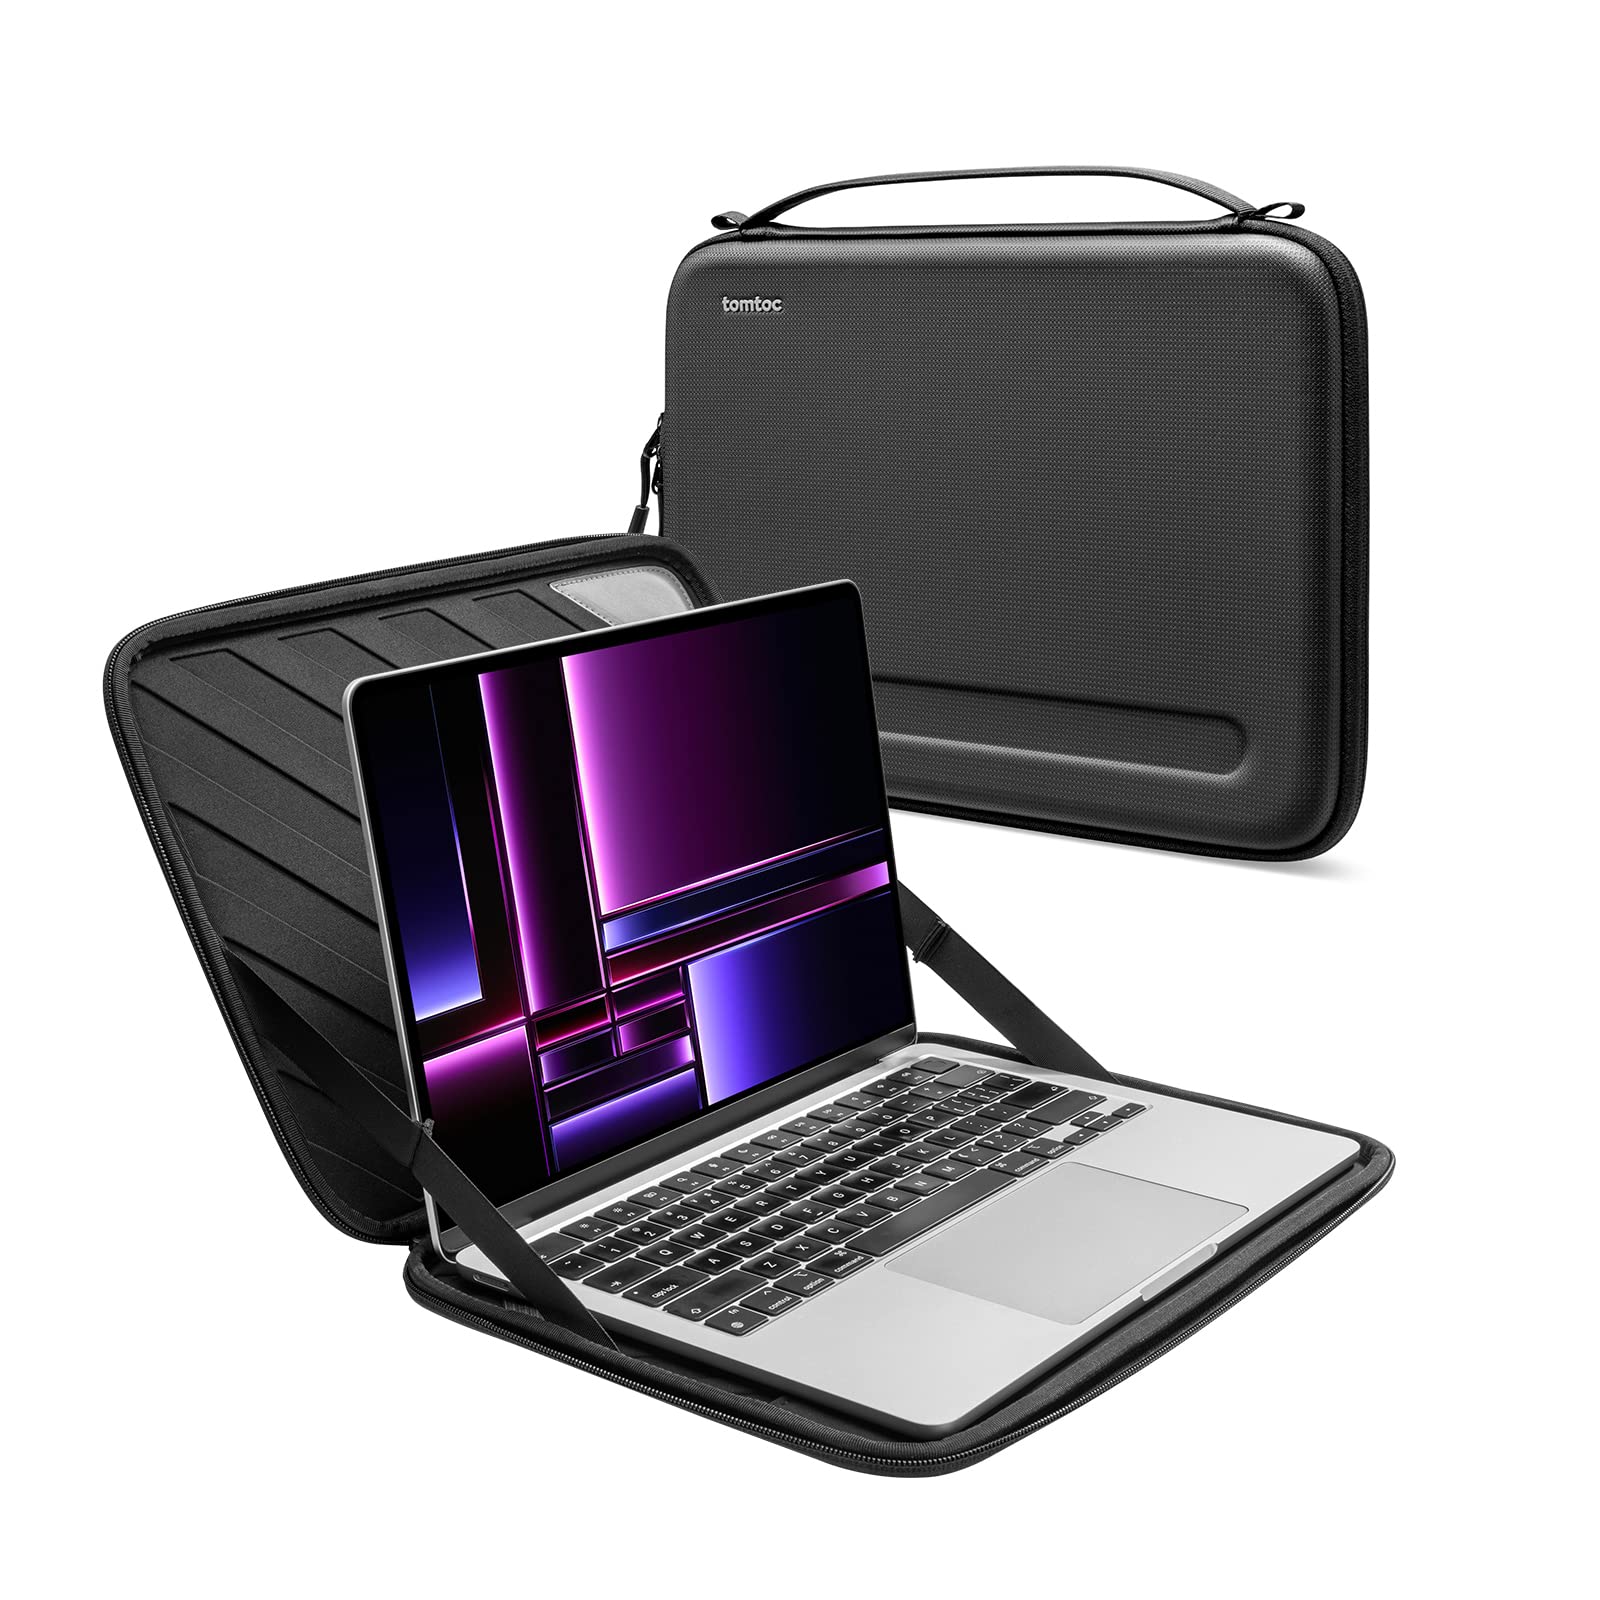 Opt for a water-resistant or waterproof case to shield your laptop from spills, rain, and other liquid hazards.
Consider a case with additional storage pockets to conveniently carry accessories like chargers, cables, and mice.